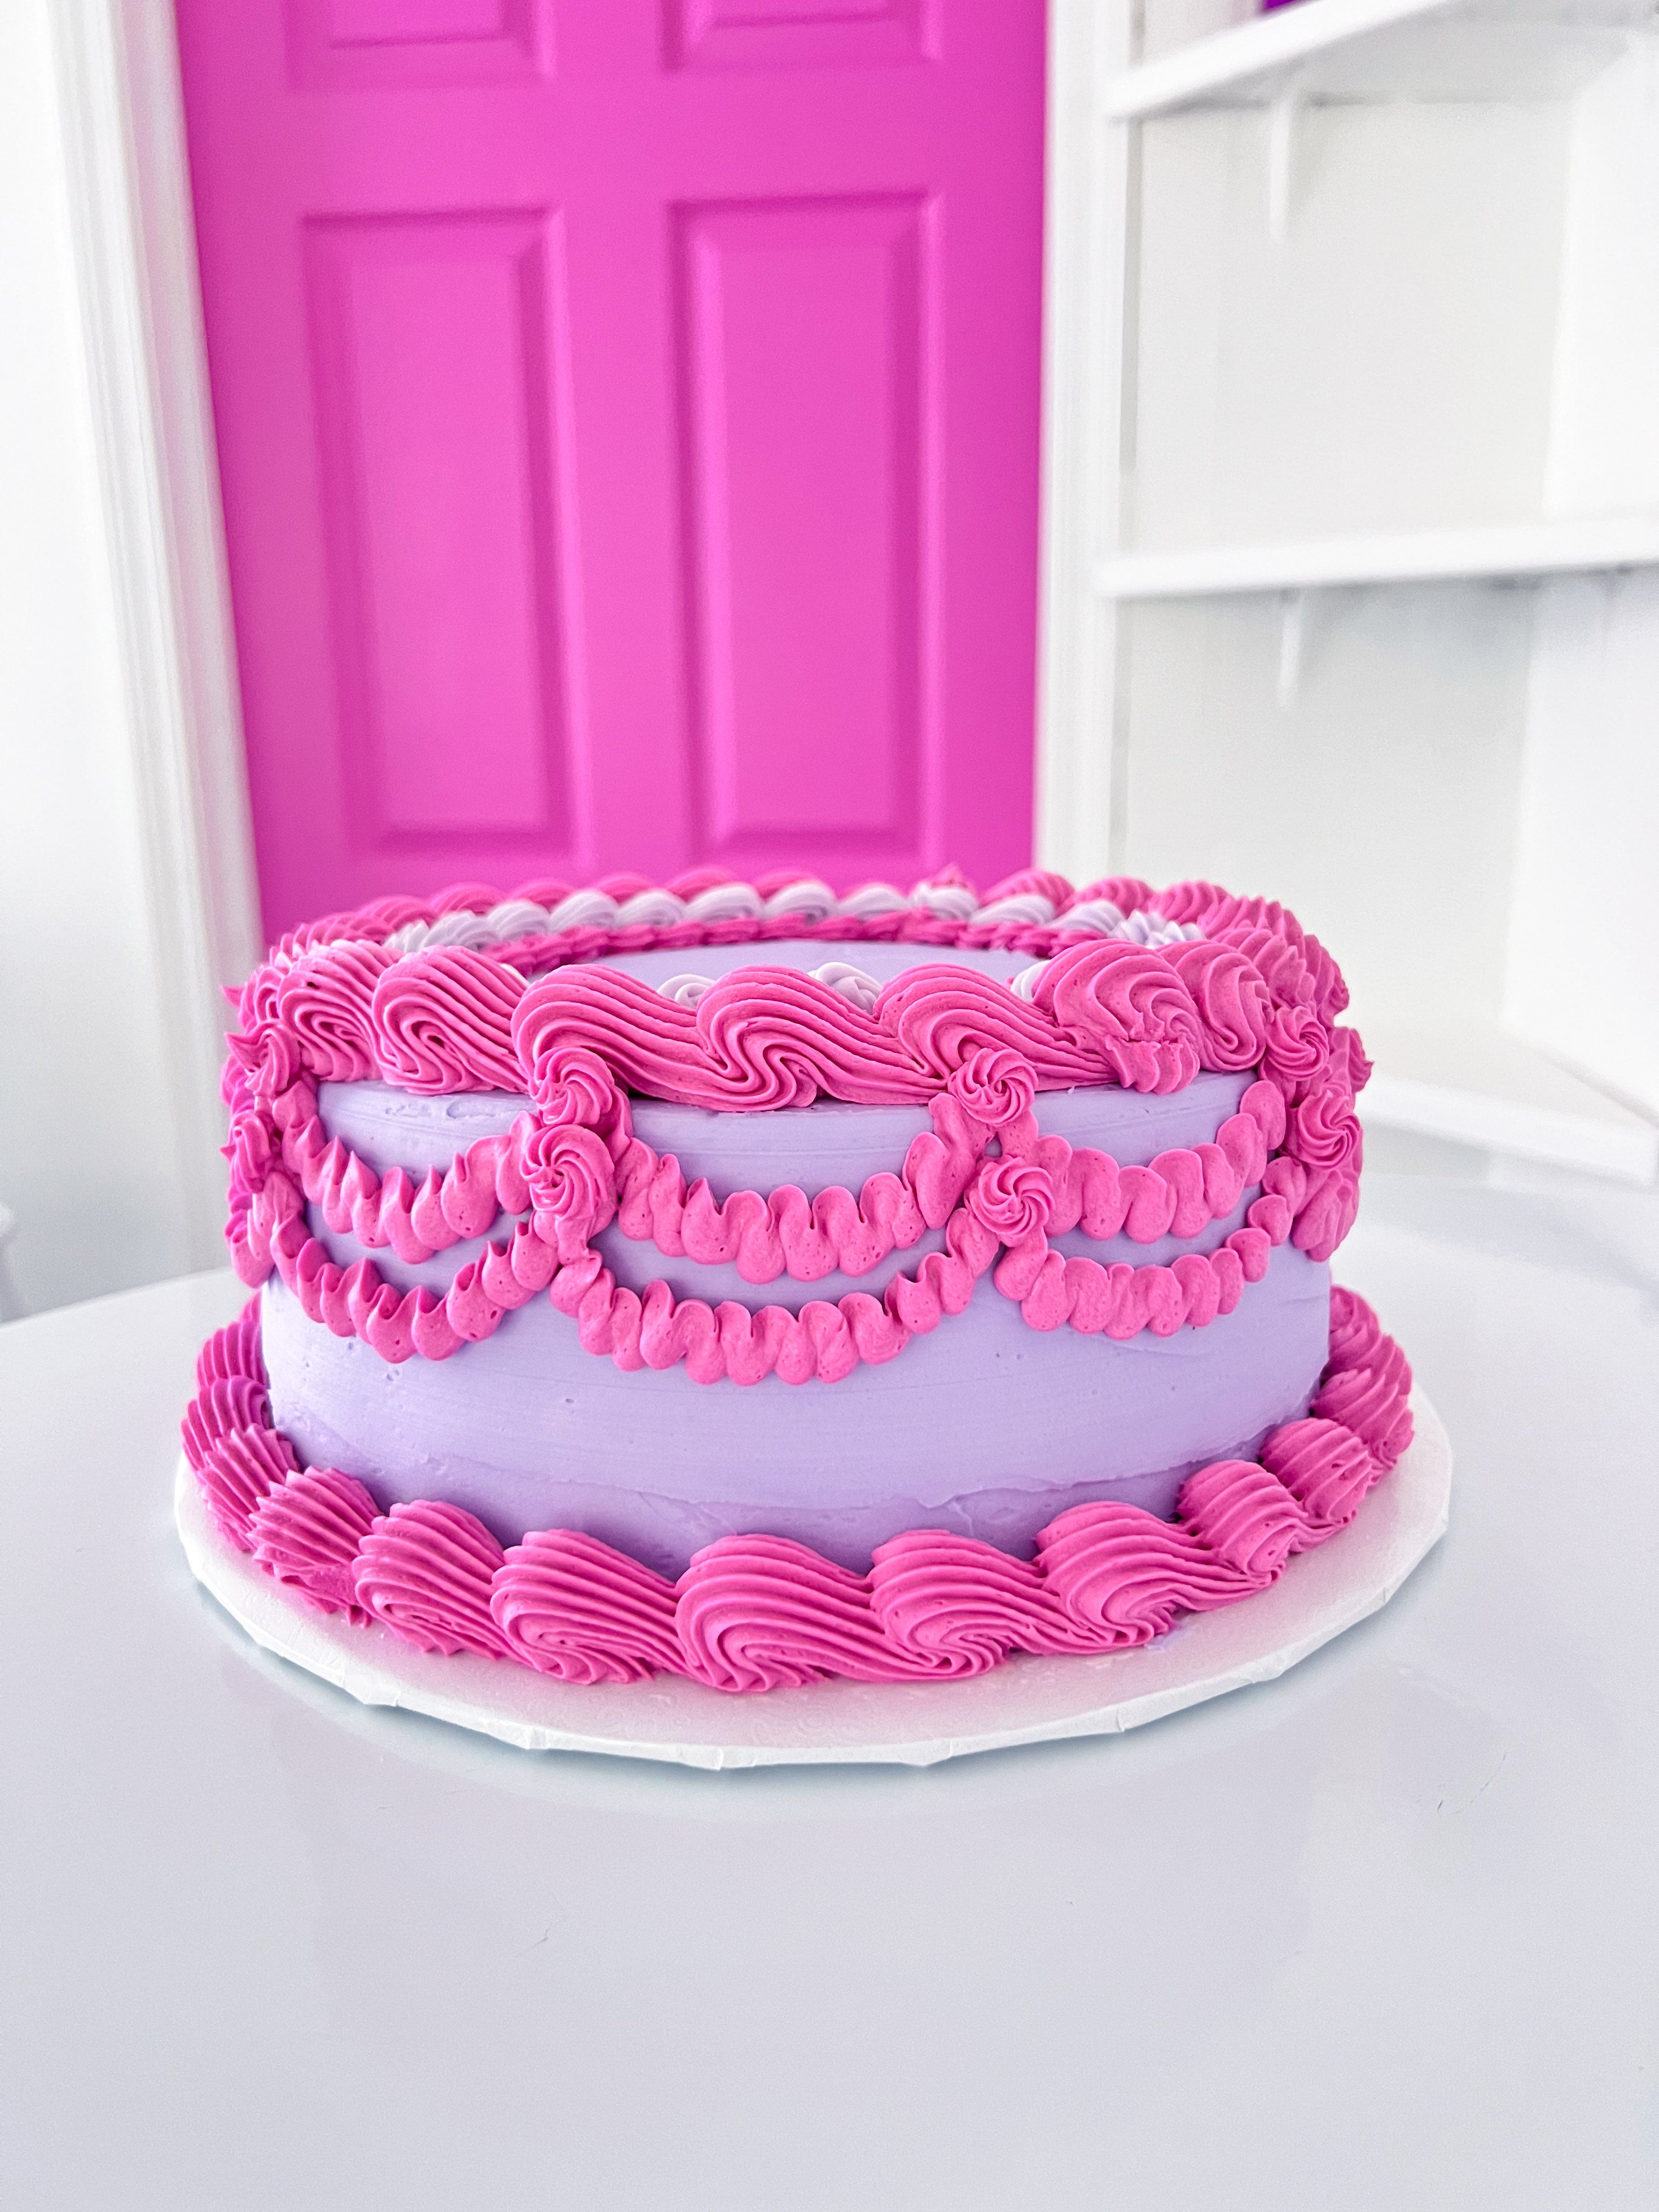 Vintage Inspired Piped Buttercream Cake Tutorial - Cakes by Lynz